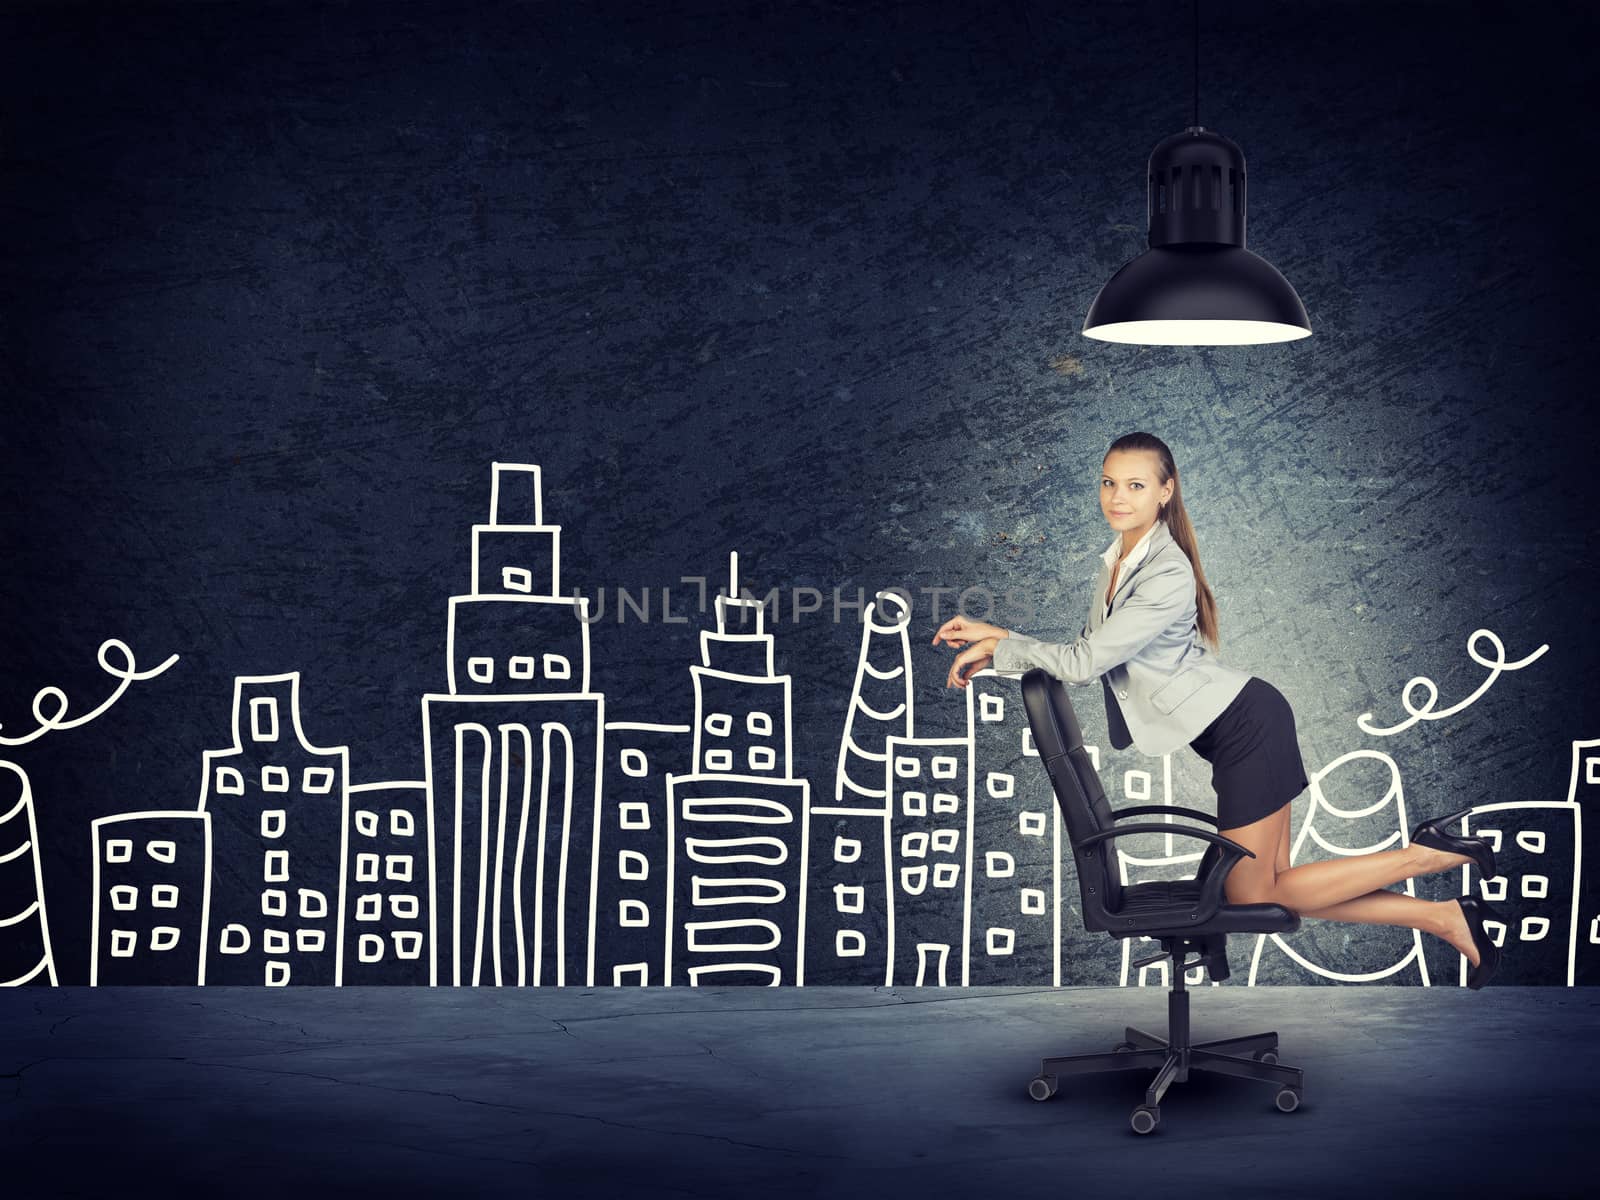 Portrait of Young Businesswoman Kneeling on Office Chair Beneath Overhead Light in front of Illustration of City Skyline in Aspirational Concept Image